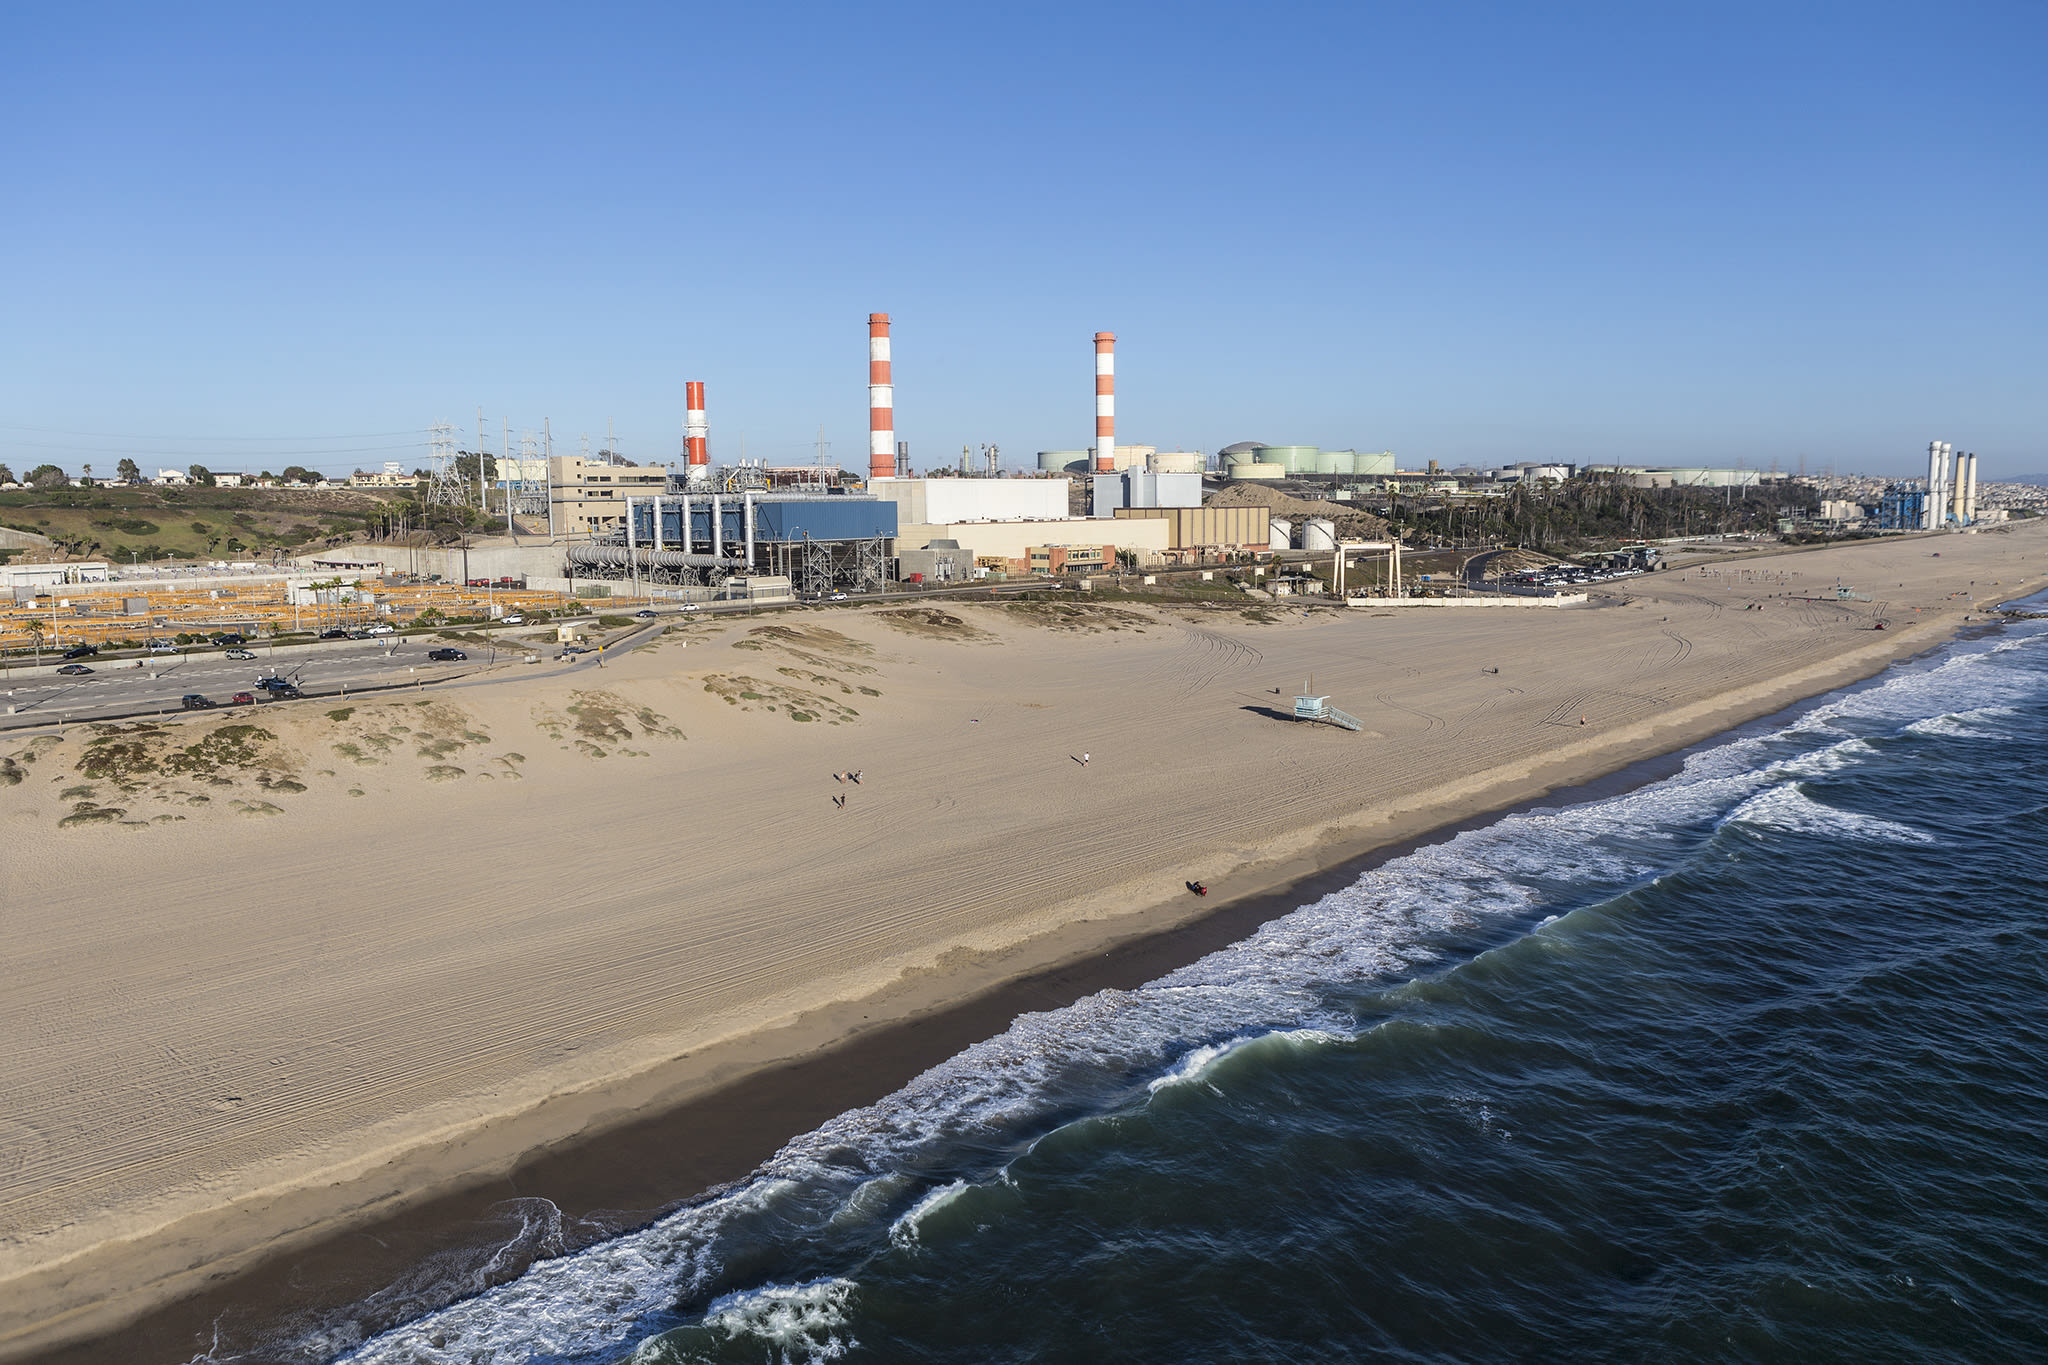 19 tons of sewage spilled onto one of Calif.'s busiest beaches